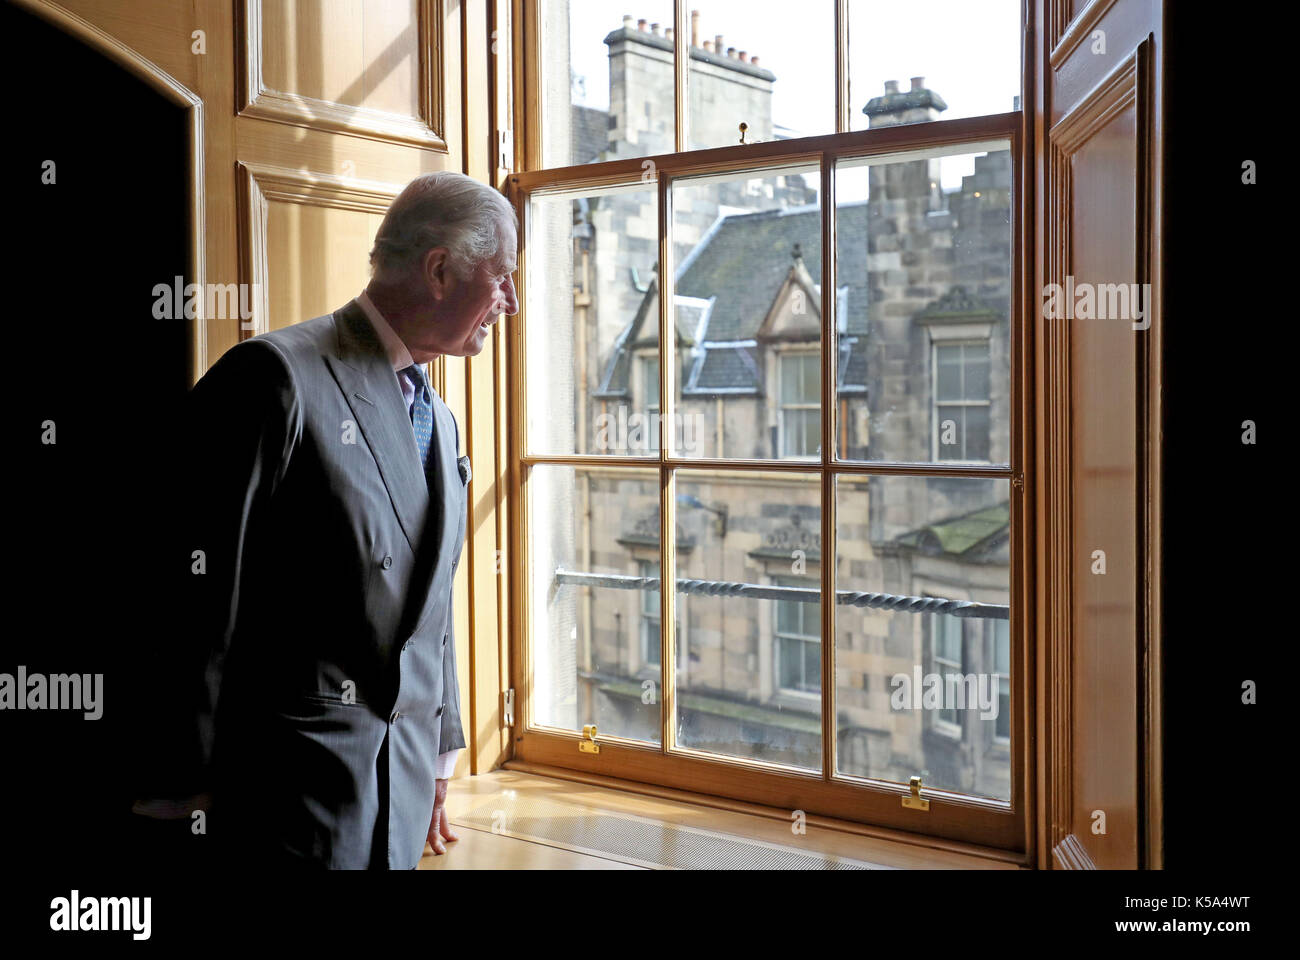 The Prince of Wales, known as the Duke and Duchess of Rothesay while in Scotland, visits the Patrick Geddes Centre at Riddle's Court, an A listed 16th Century courtyard house newly restored by Scottish Historic Buildings Trust Stock Photo